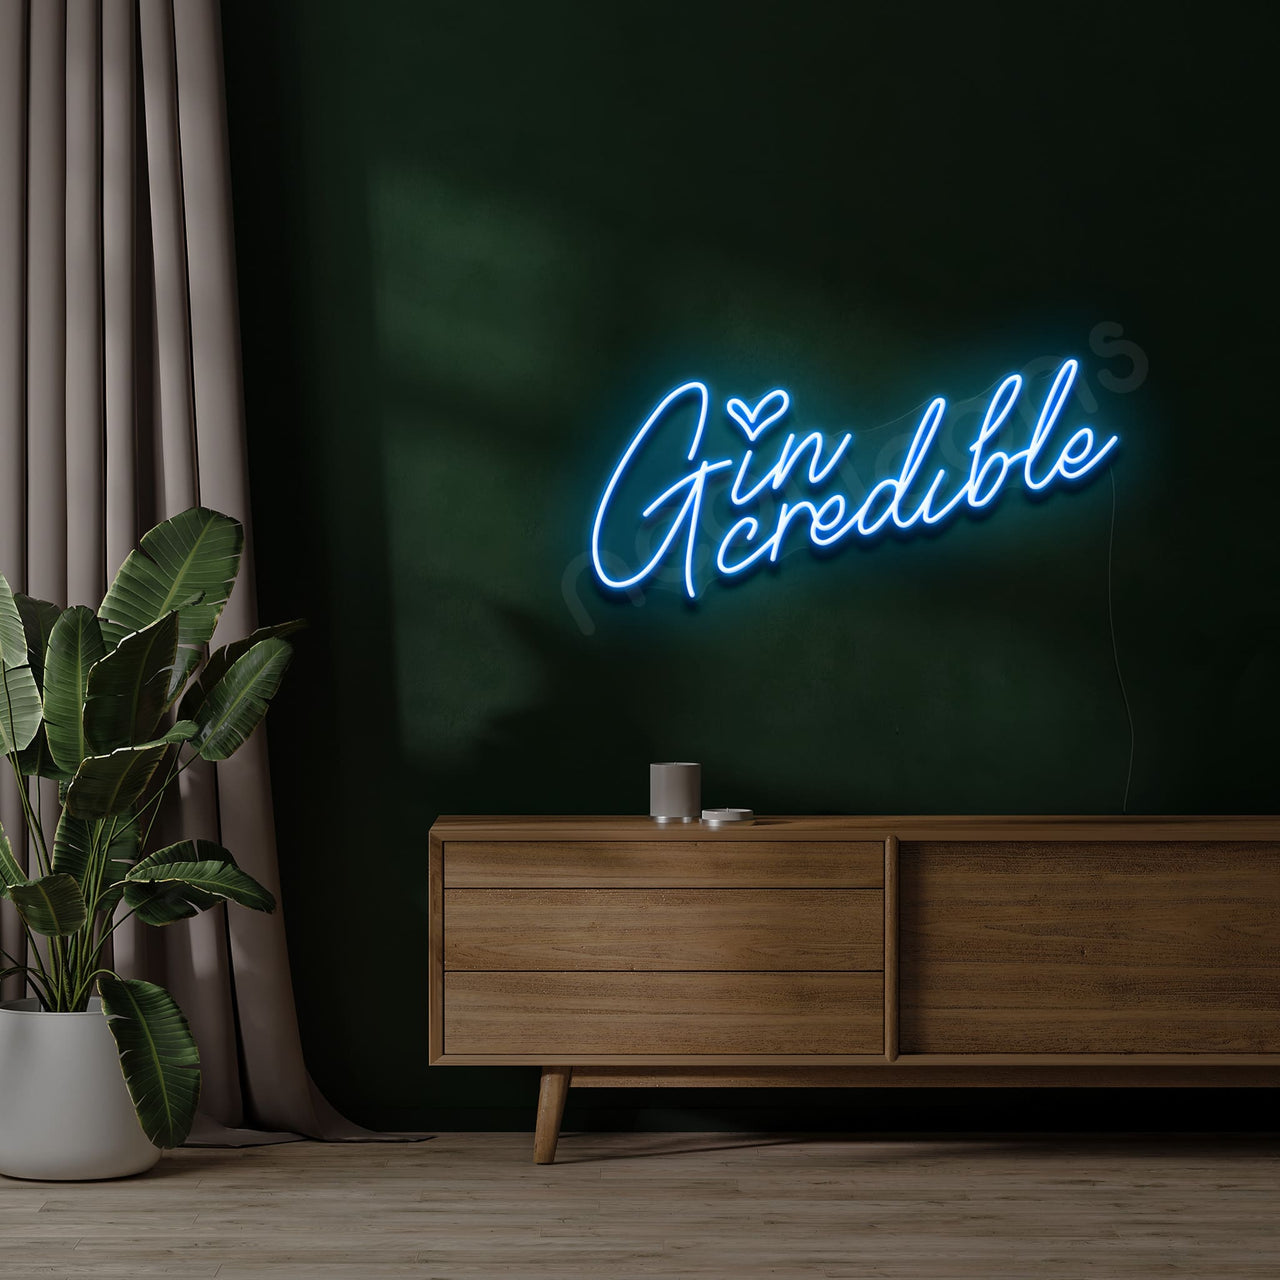 "Gincredible" Neon Sign by Neon Icons